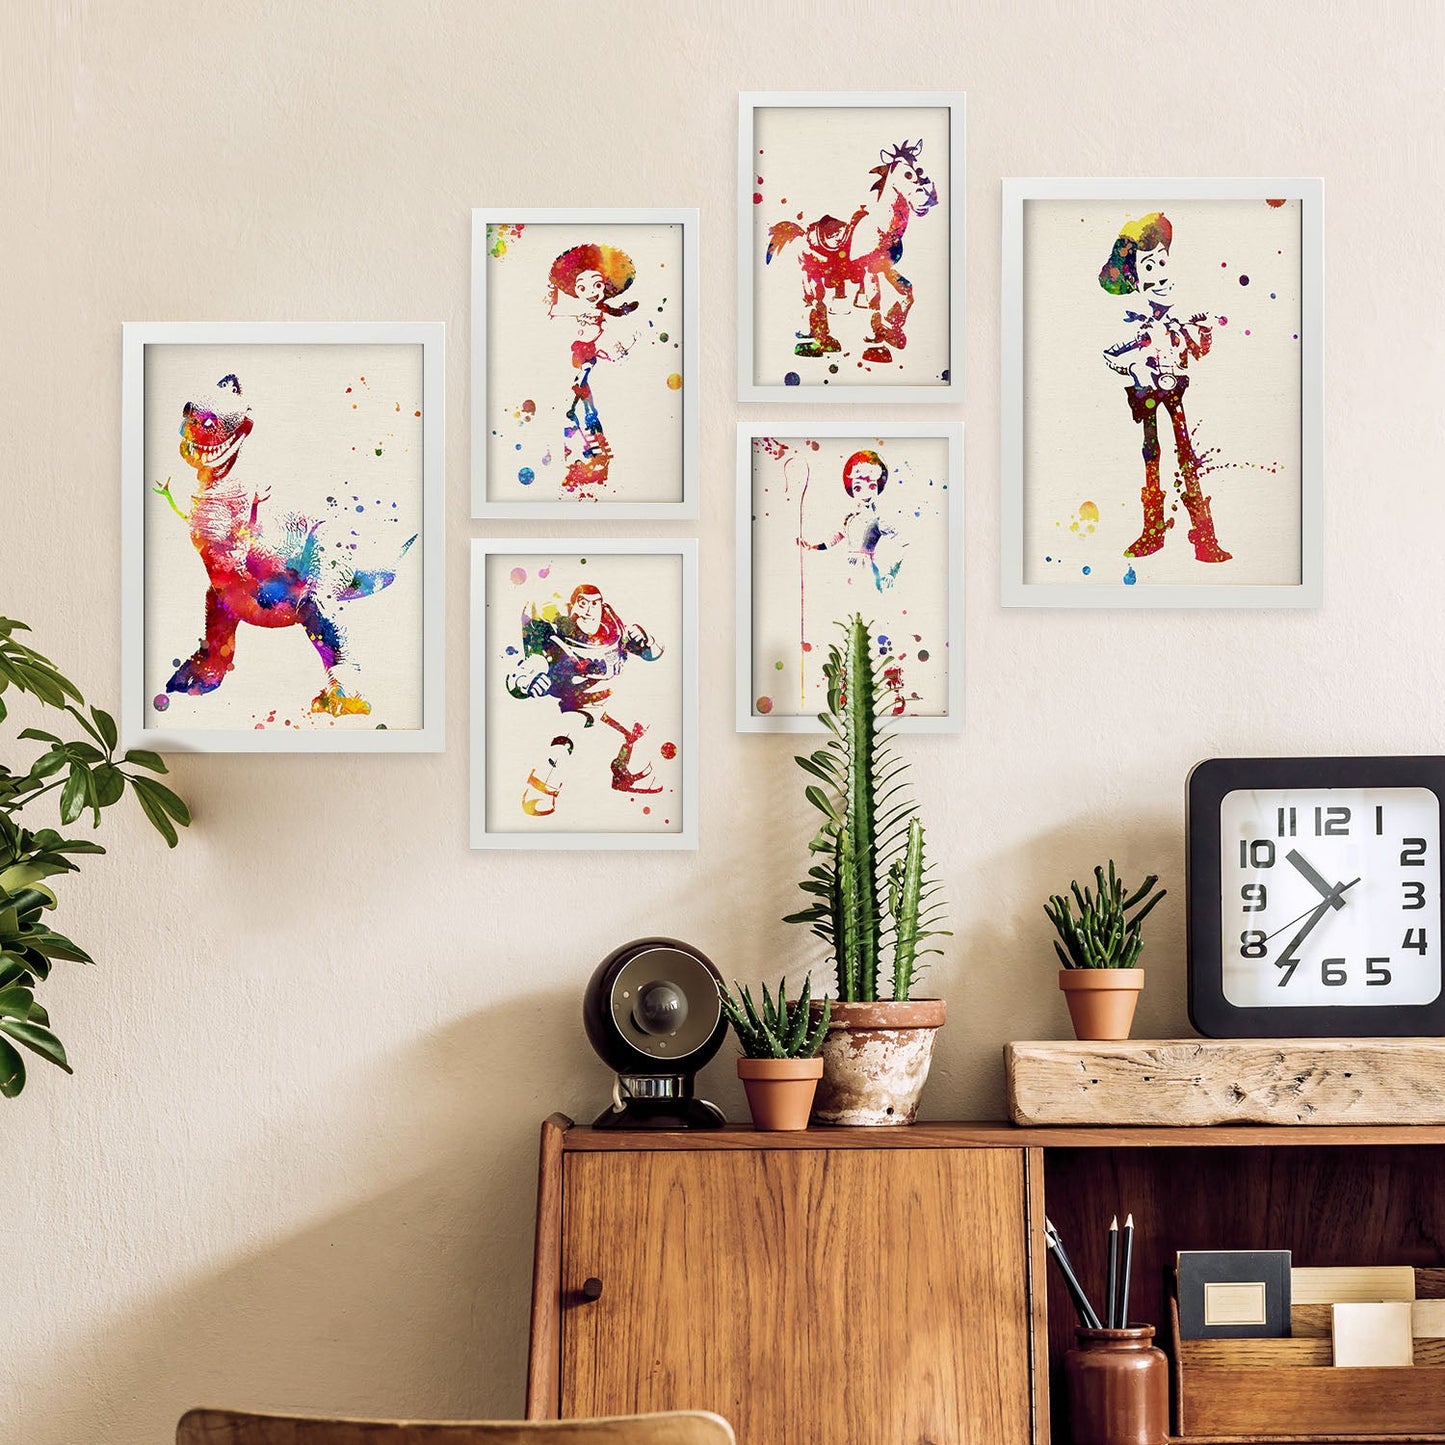 Nacnic toy sotry. Aesthetic Wall Art Prints for Bedroom or Living Room Design.